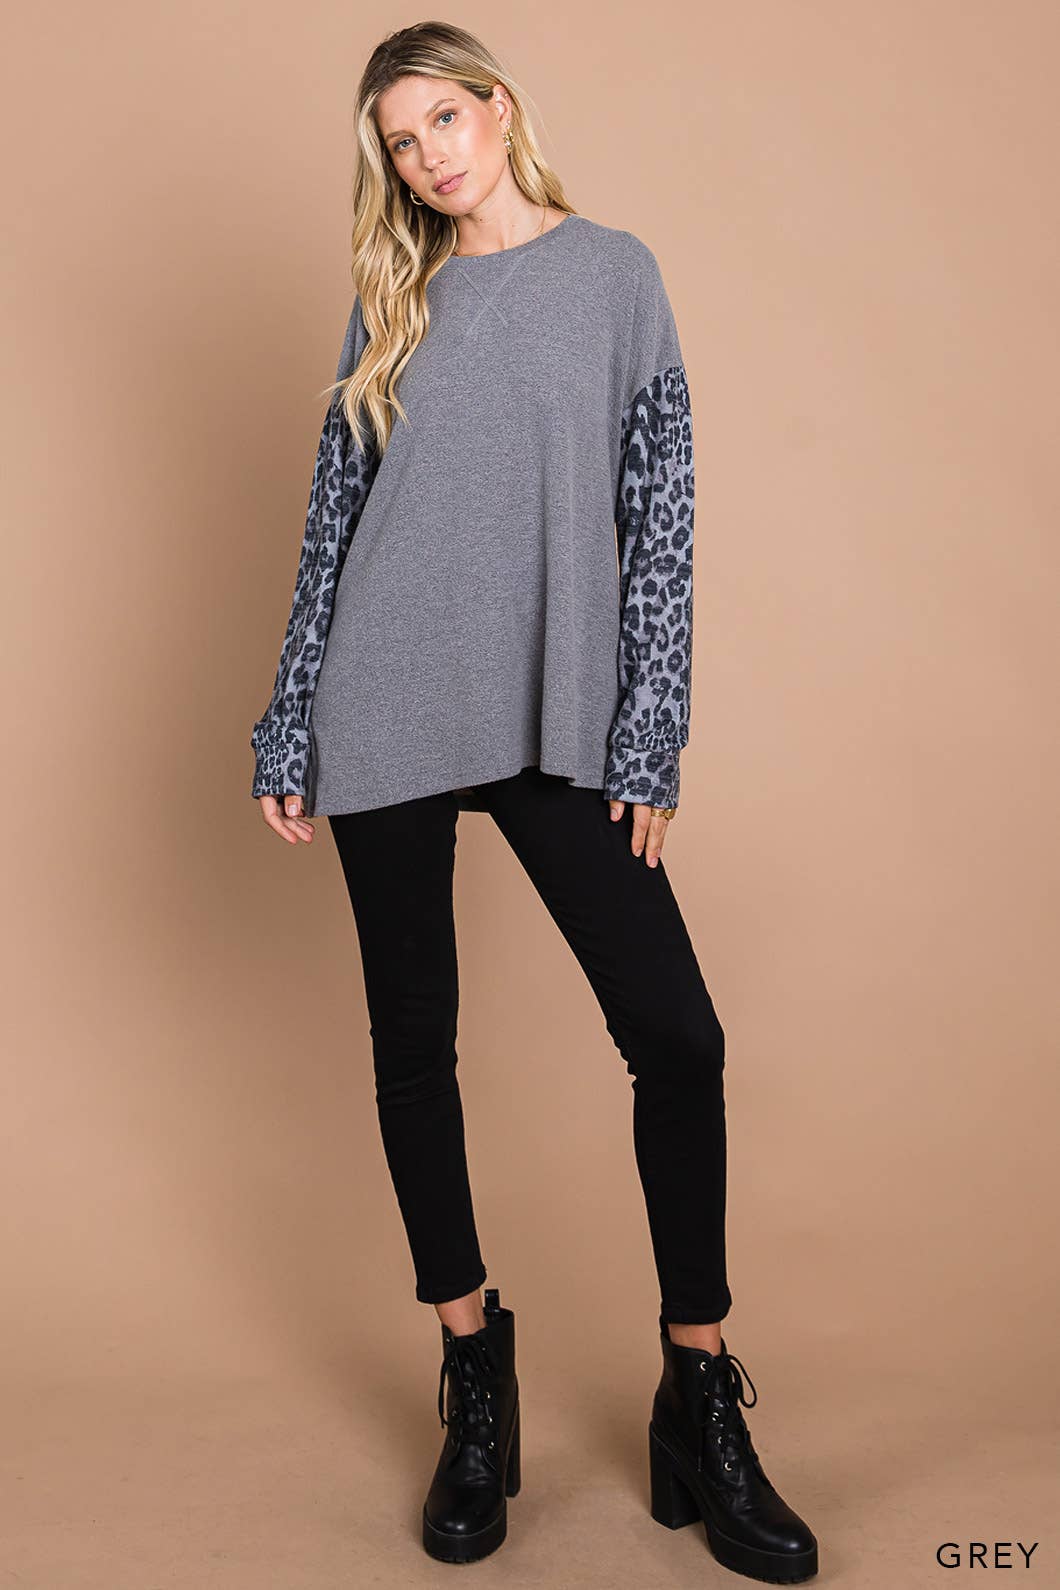 Women's Soft Brushed Hacci Top W/ Contrast Sleeve